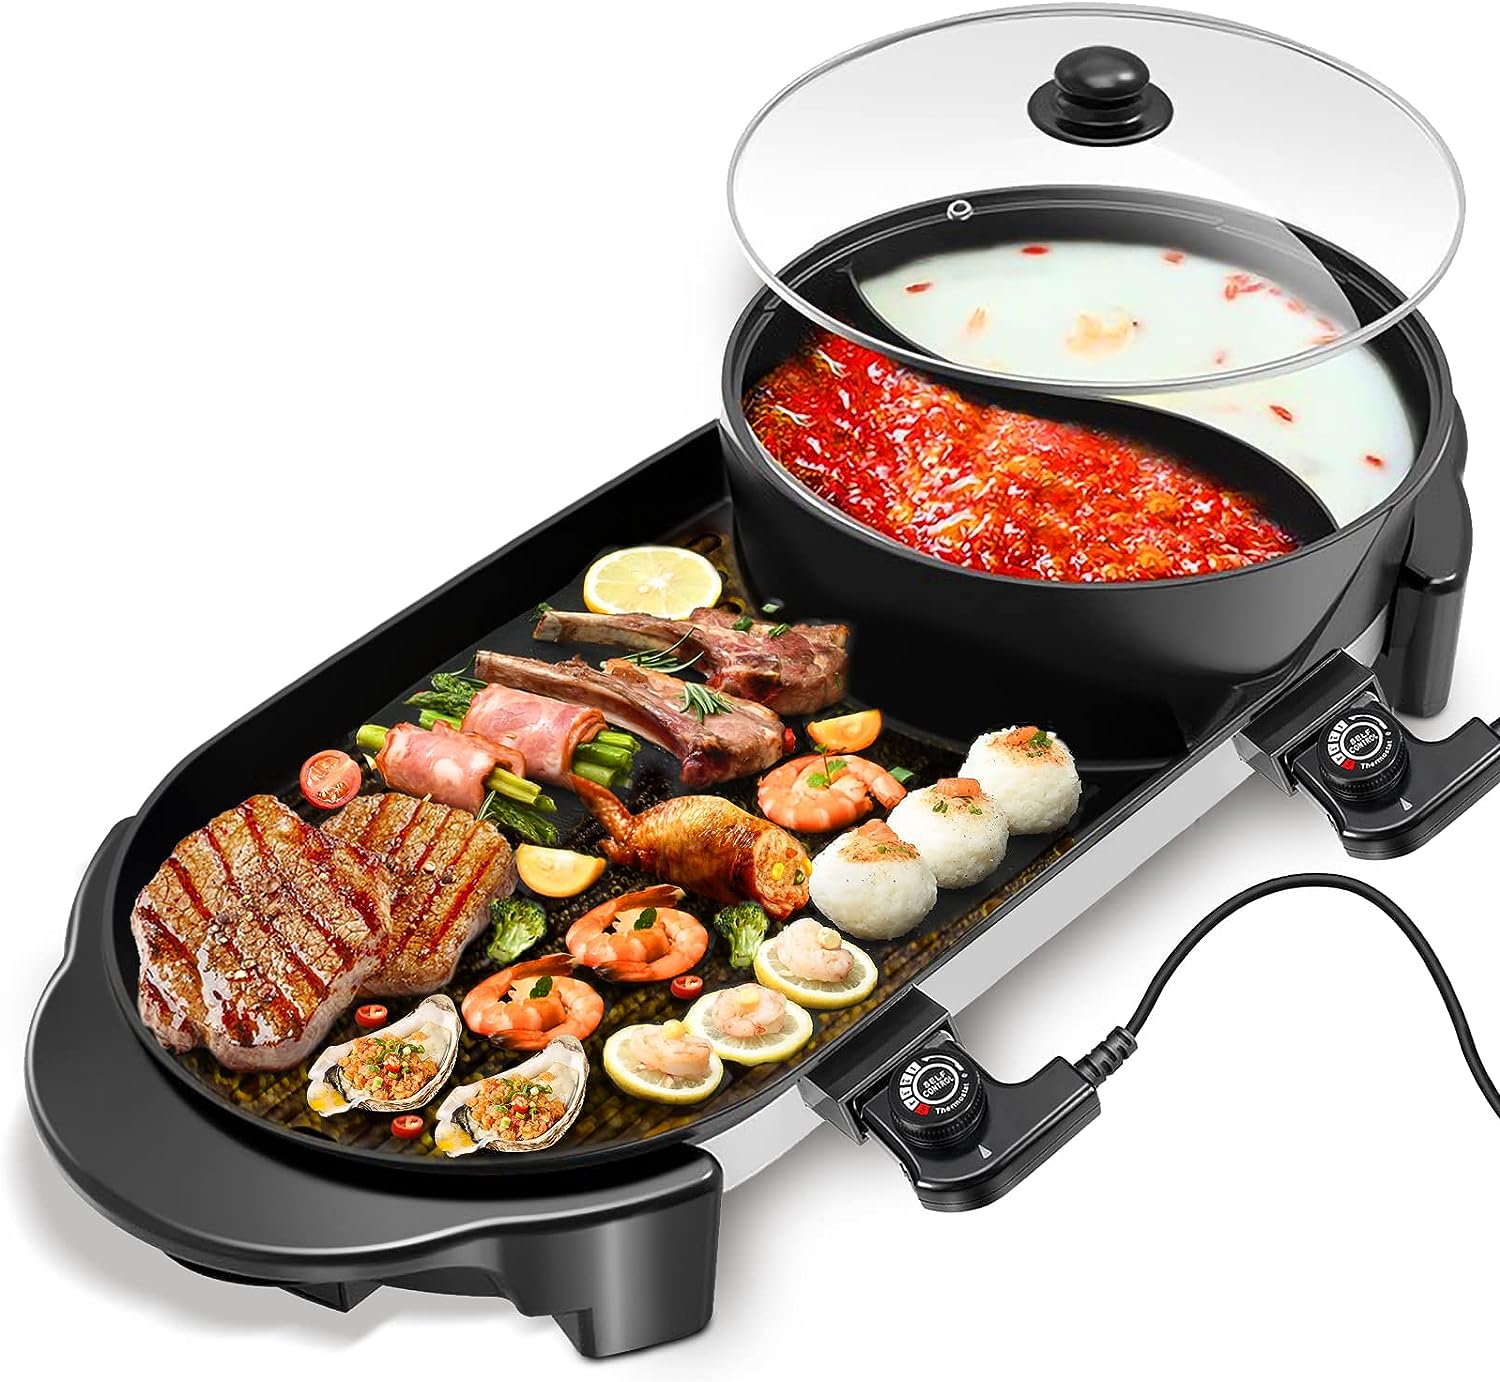 Topwit Hot Pot Electric with Grill, 2 in 1 Indoor Non-Stick Electric Pot and Griddle for Korean BBQ, Steaks, Shabu Shabu and Noodles, Independent